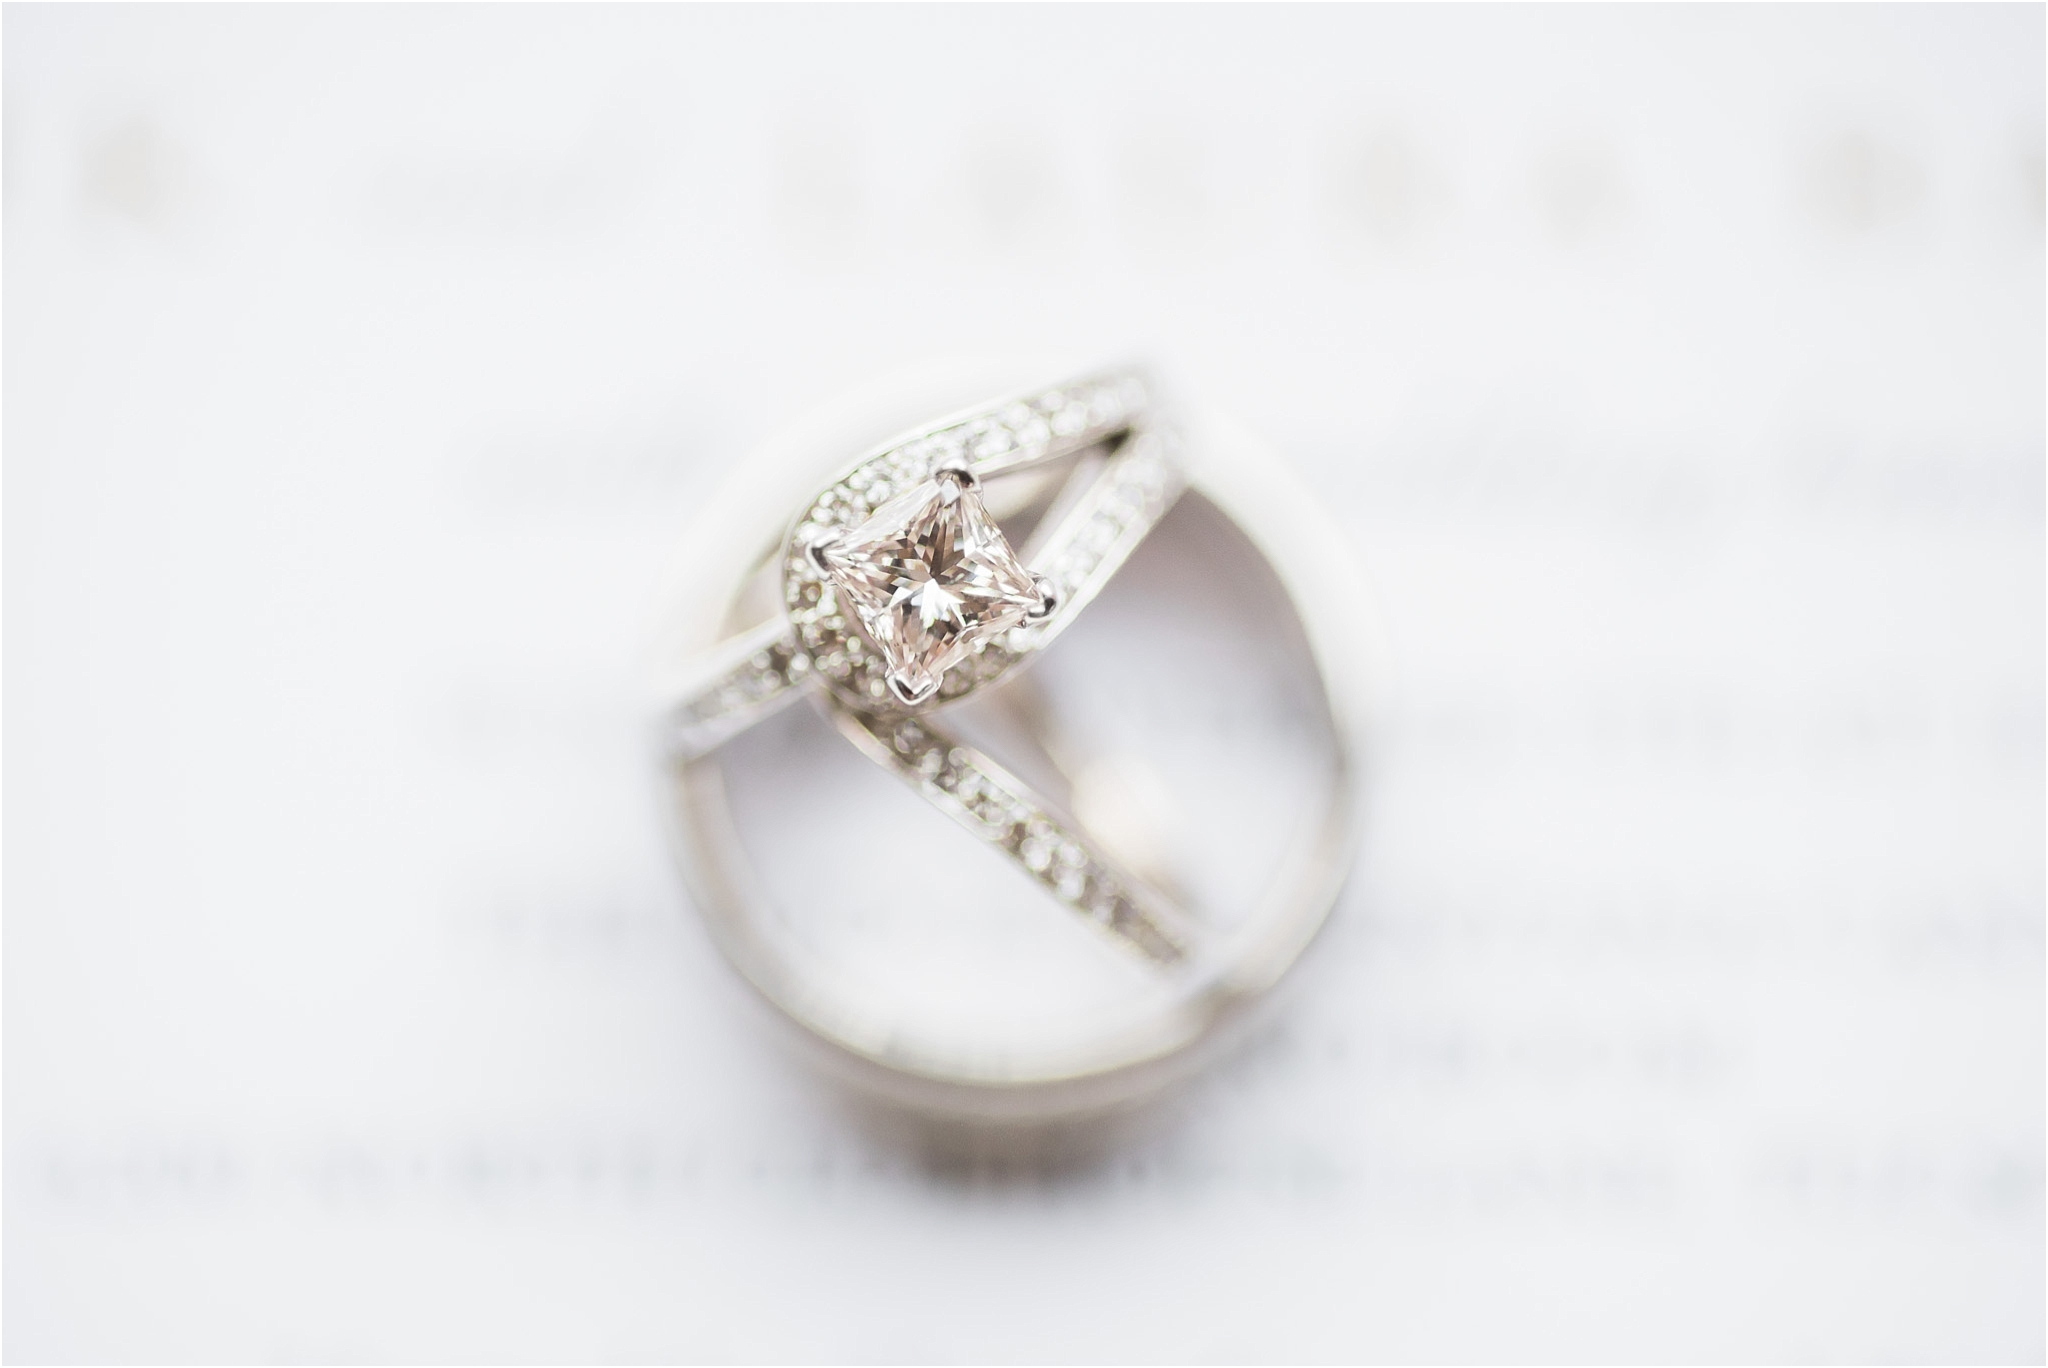 The Lodge at Ventana Canyon Wedding Rings and Details